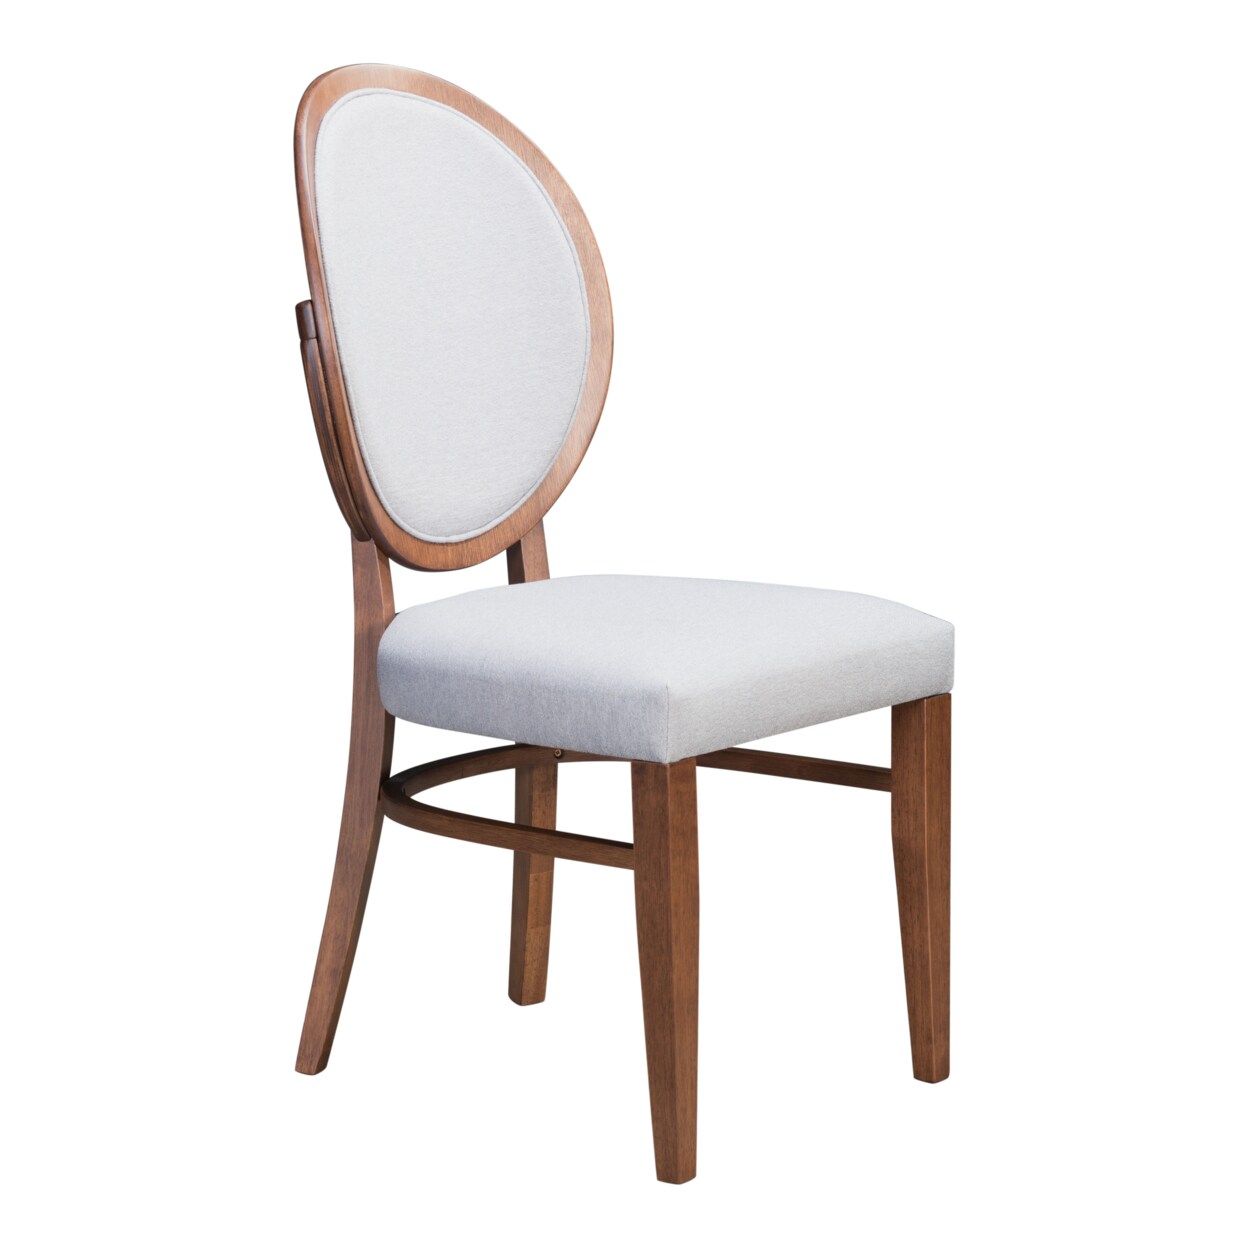 Zuo Modern Contemporary Inc. Regents Dining Chair (Set of 2) Walnut and Light Gray